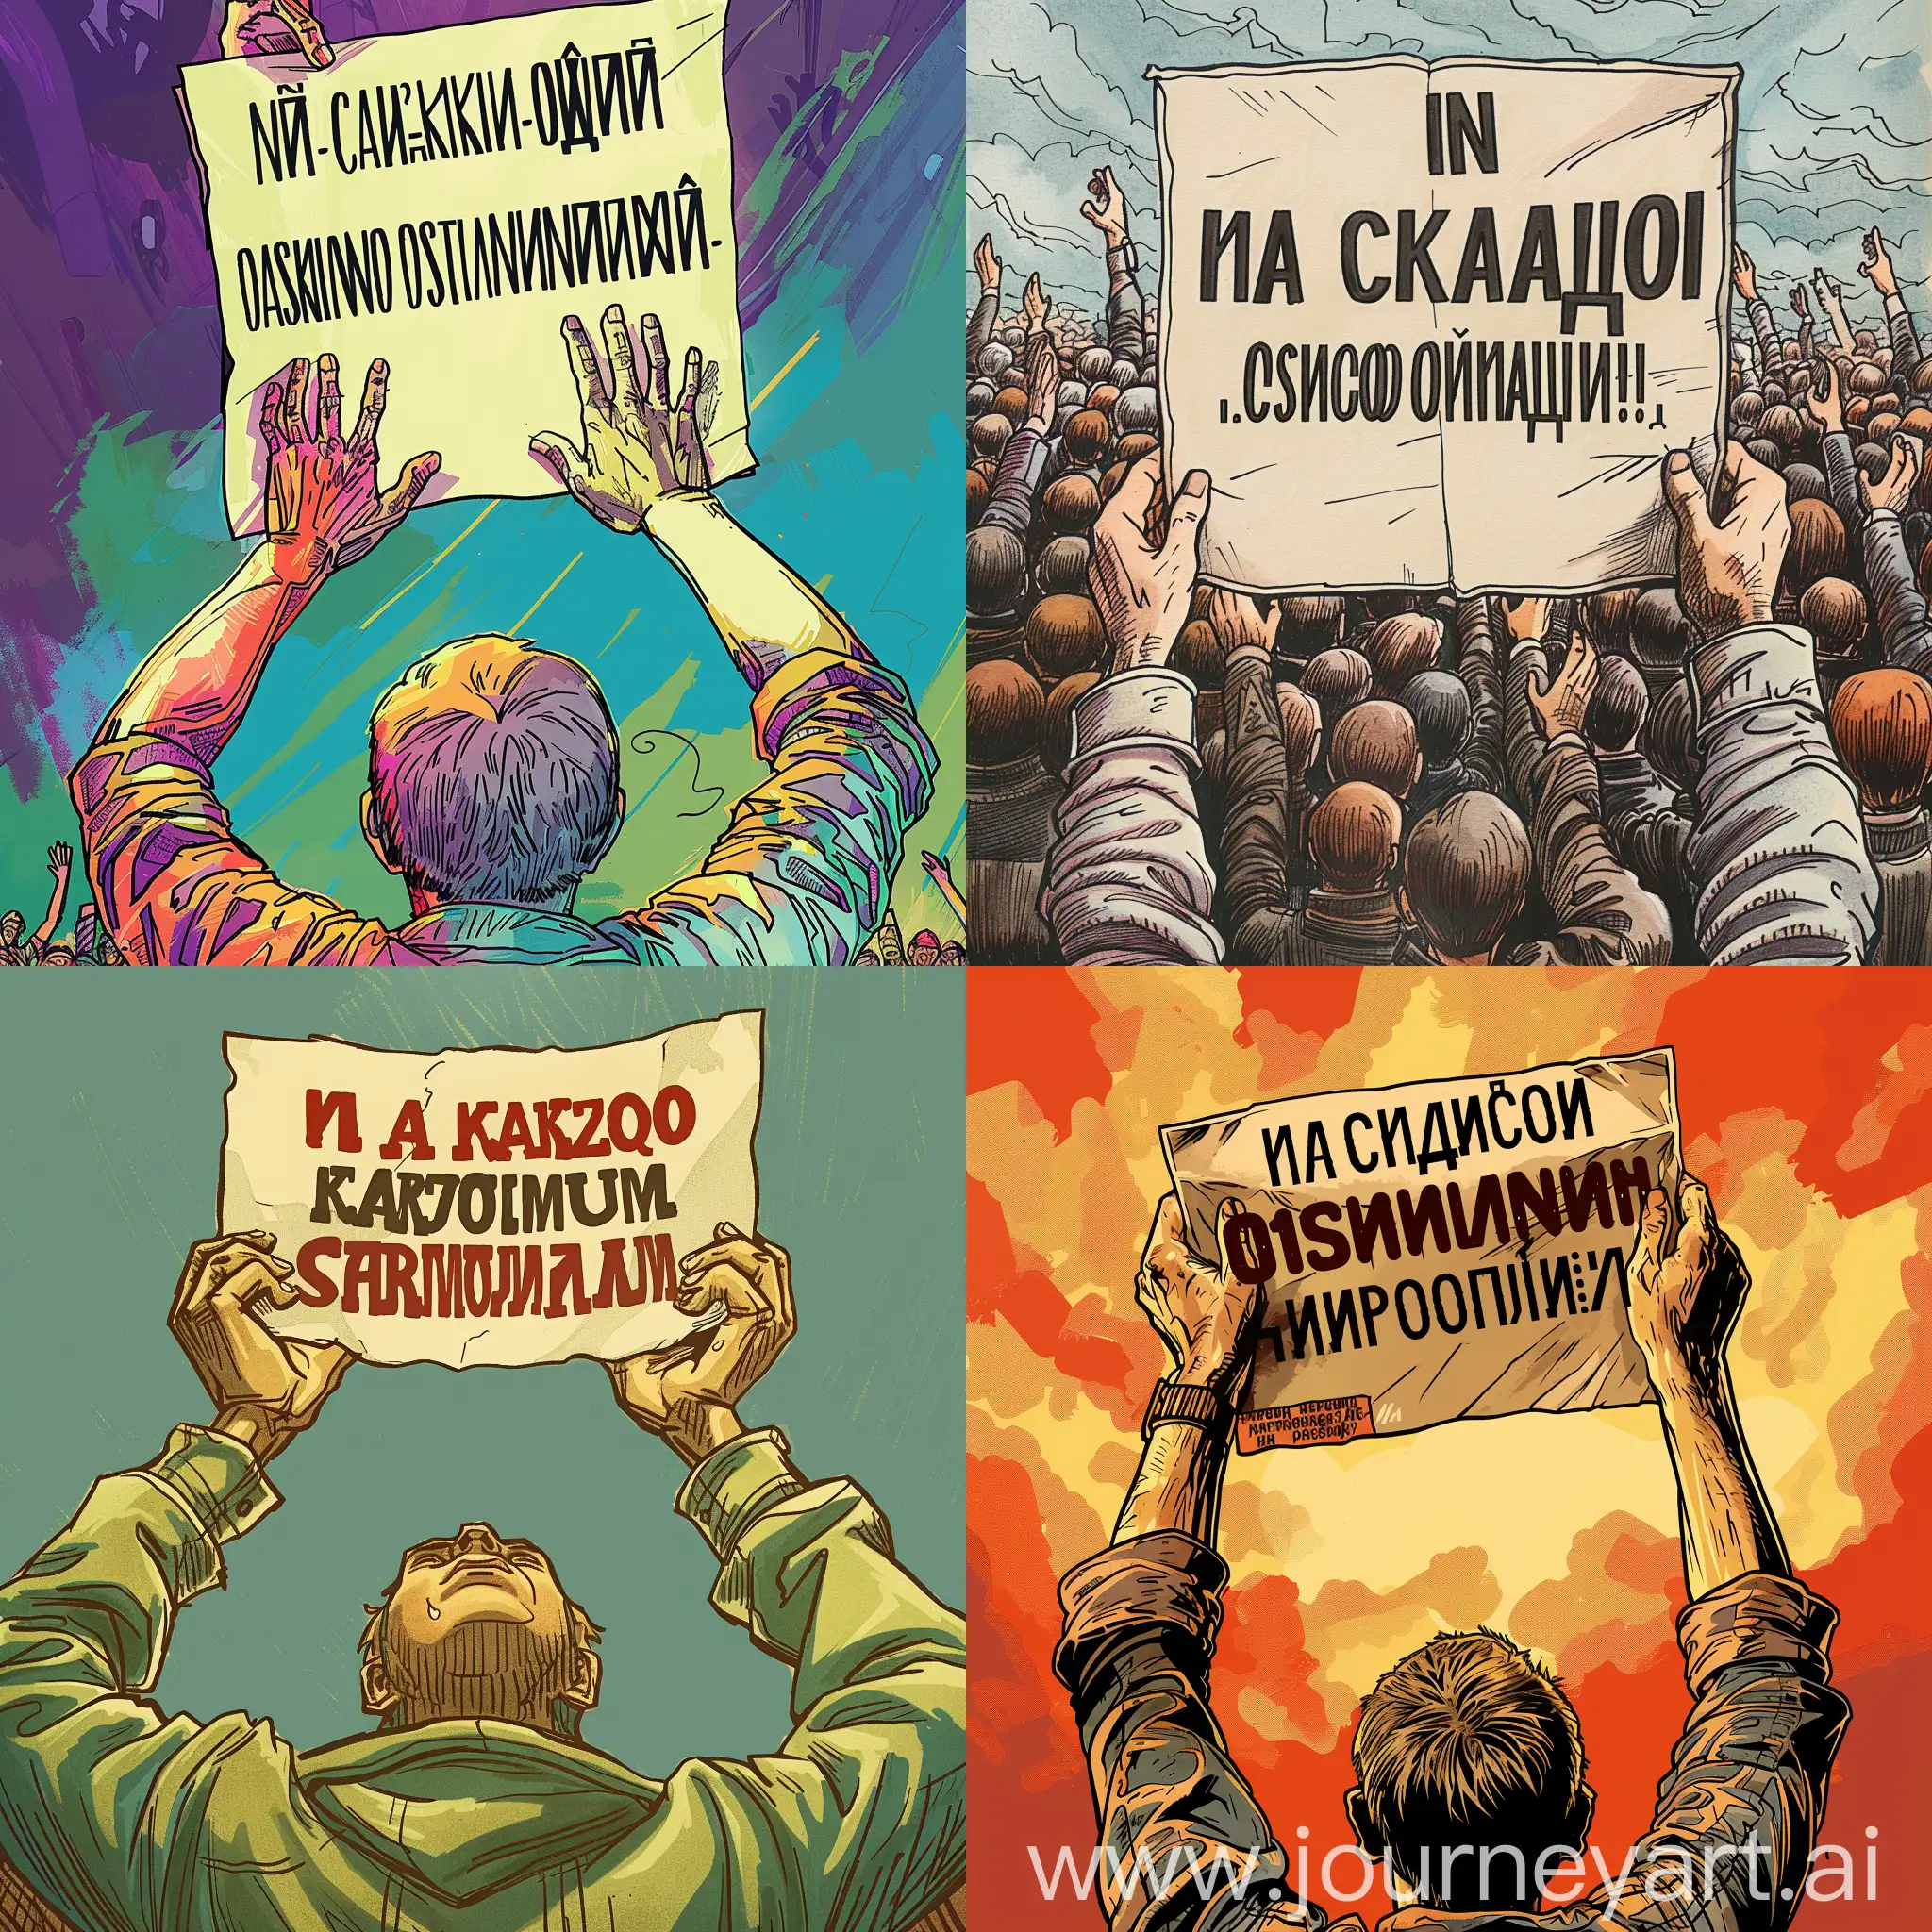 draw in different styles (taking into account the latest trends in graphic design) a cover for a 1500x1500px podcast with the title "на каком основании". the cover should show the hands of a person holding a piece of paper above his head on which it is written "на каком основании". it should be clear that it is a rally or something like that. no faces should be shown